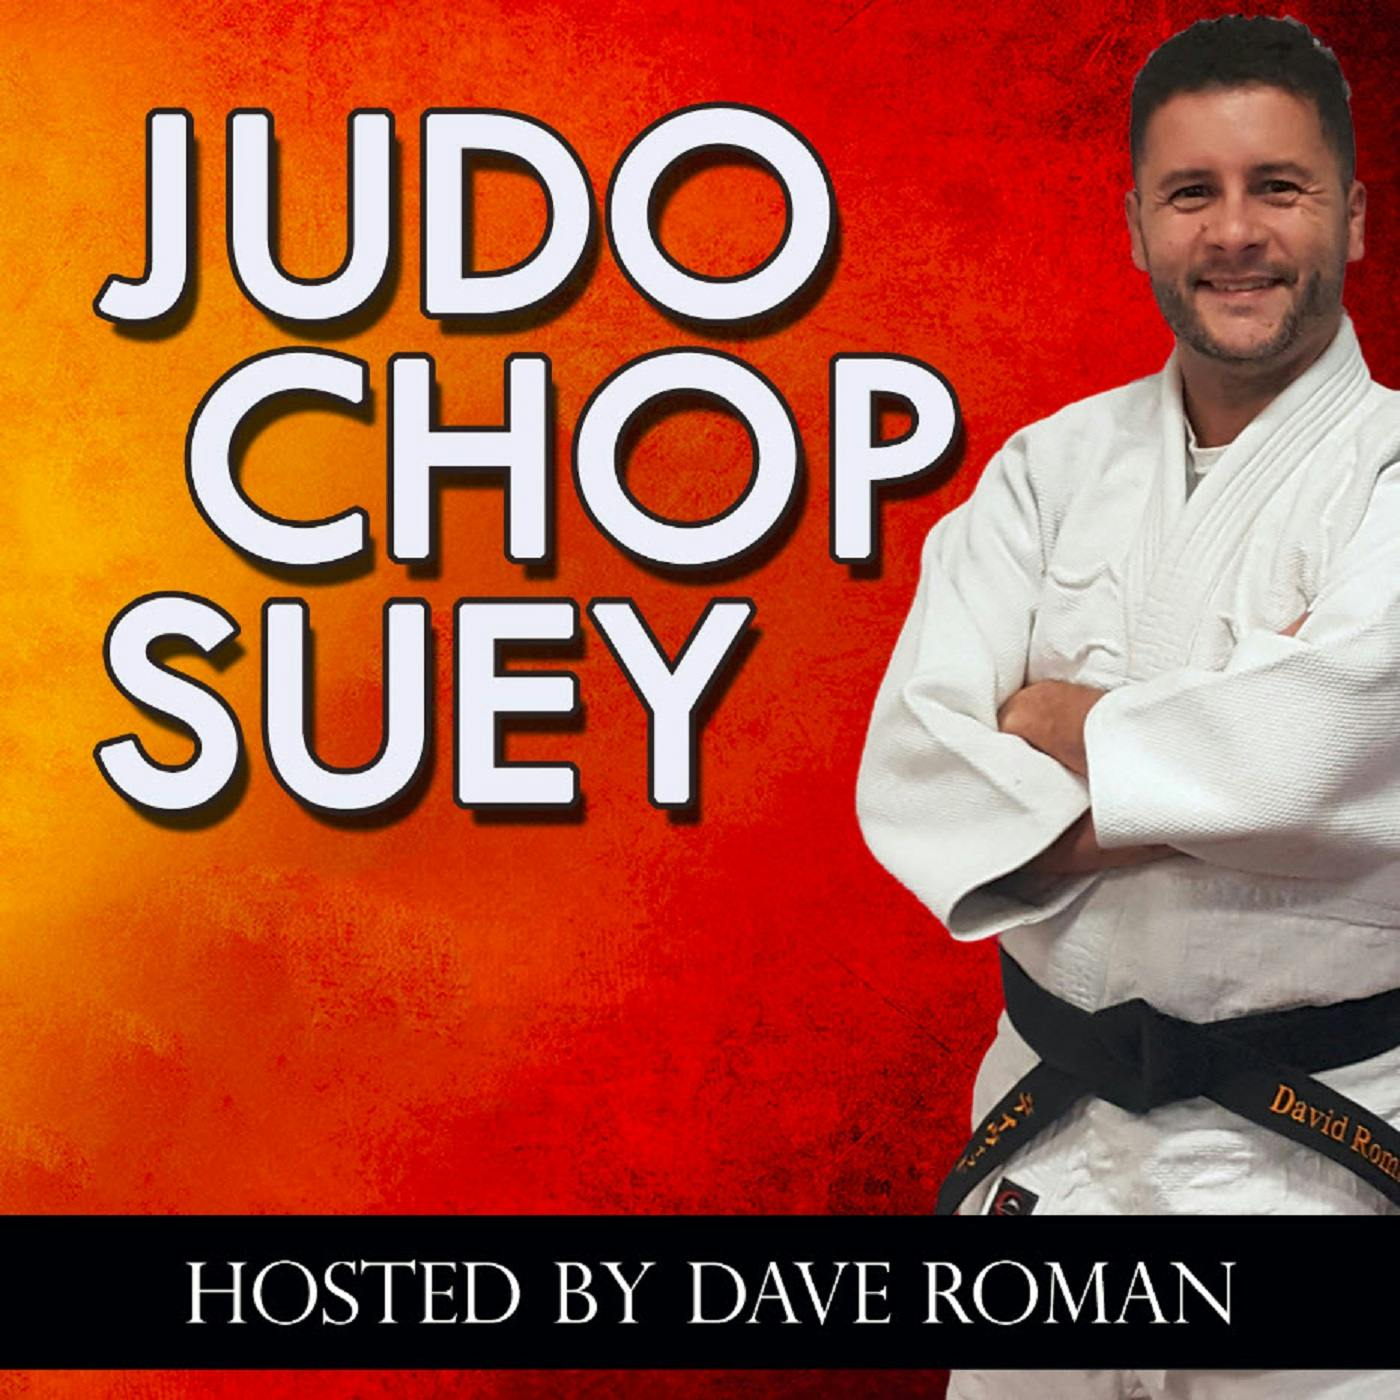 Judo Chop Suey Ep. 12 - Interview With The Redditor